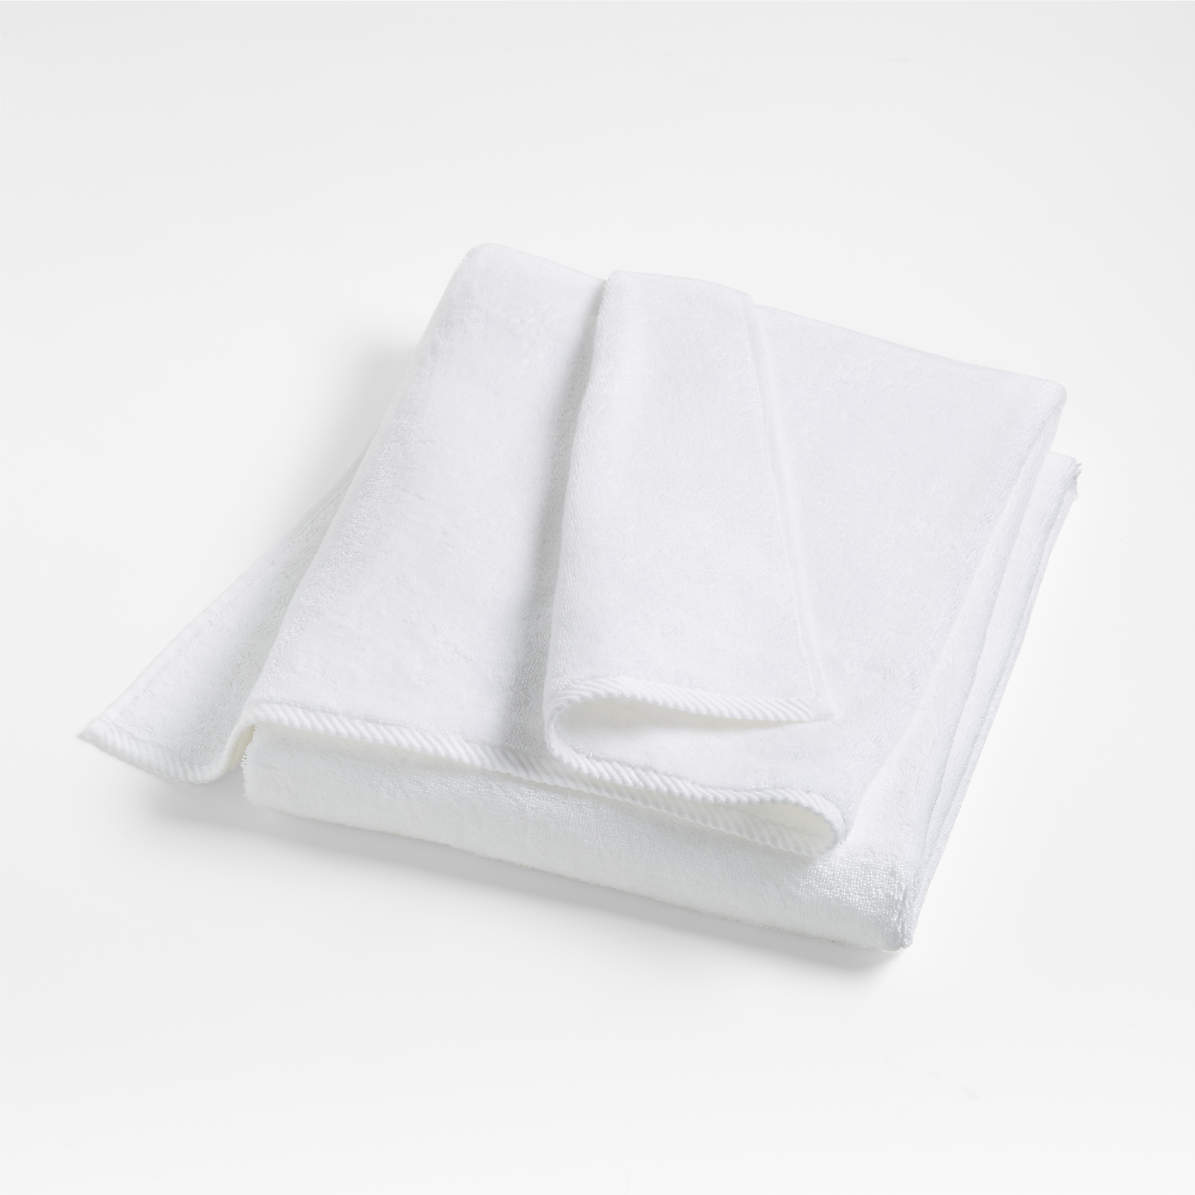 Luxury 100% Cotton Bath Sheet - Extra Large Size, Very Soft & Fluffy, Quick  Dry & Highly Absorbent, White - 33 x 70